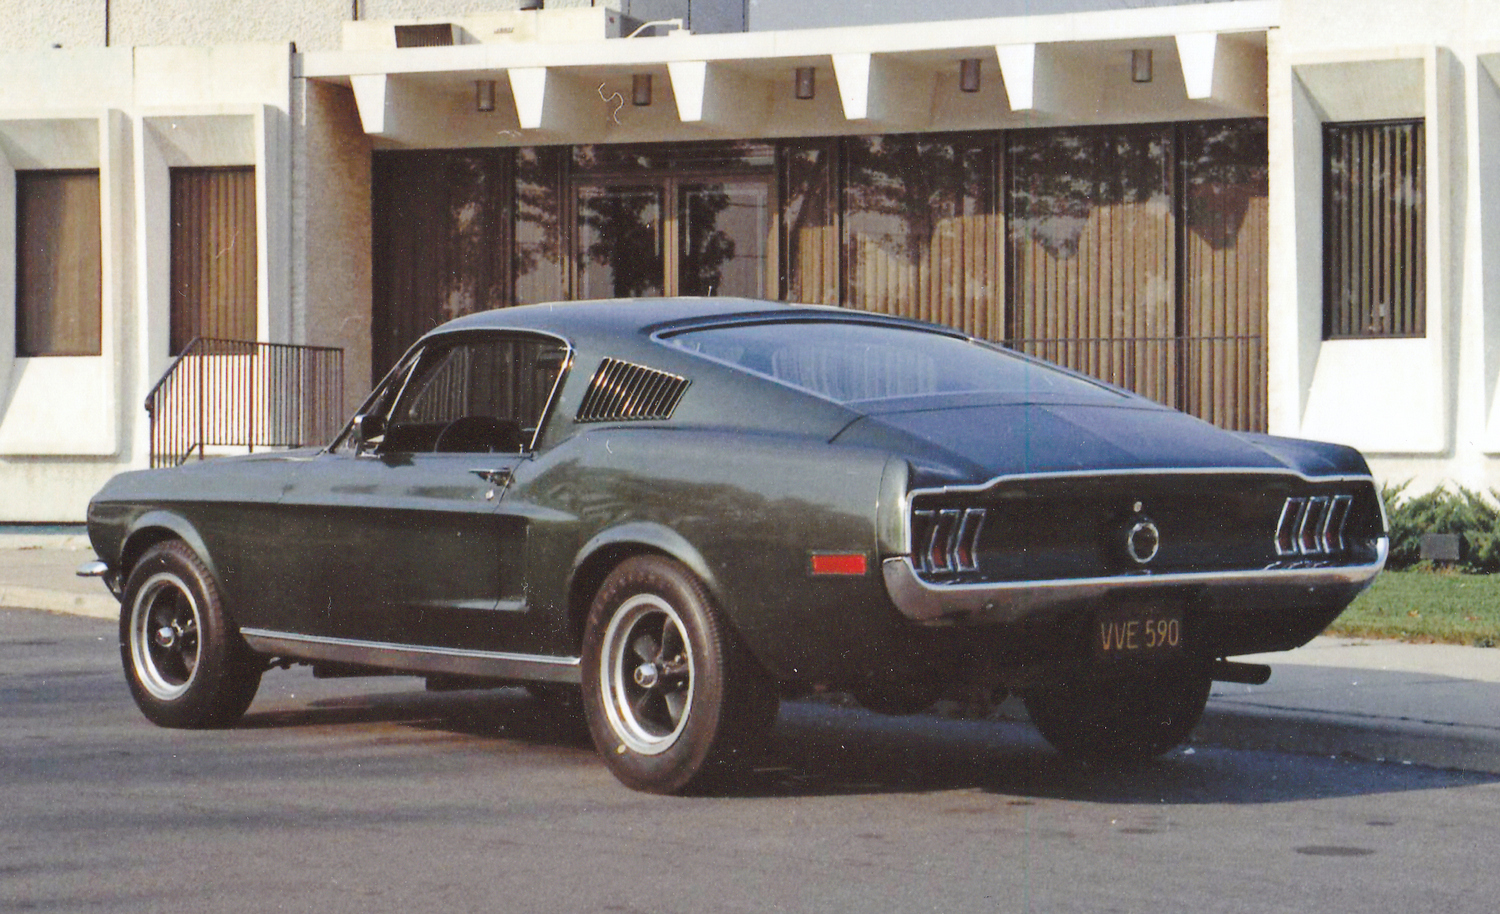   These images of surviving Bullitt no. 559 (circa 1973) are from the only known photo session of the car after it left the movie studio.&nbsp; Property Frank Marranca   